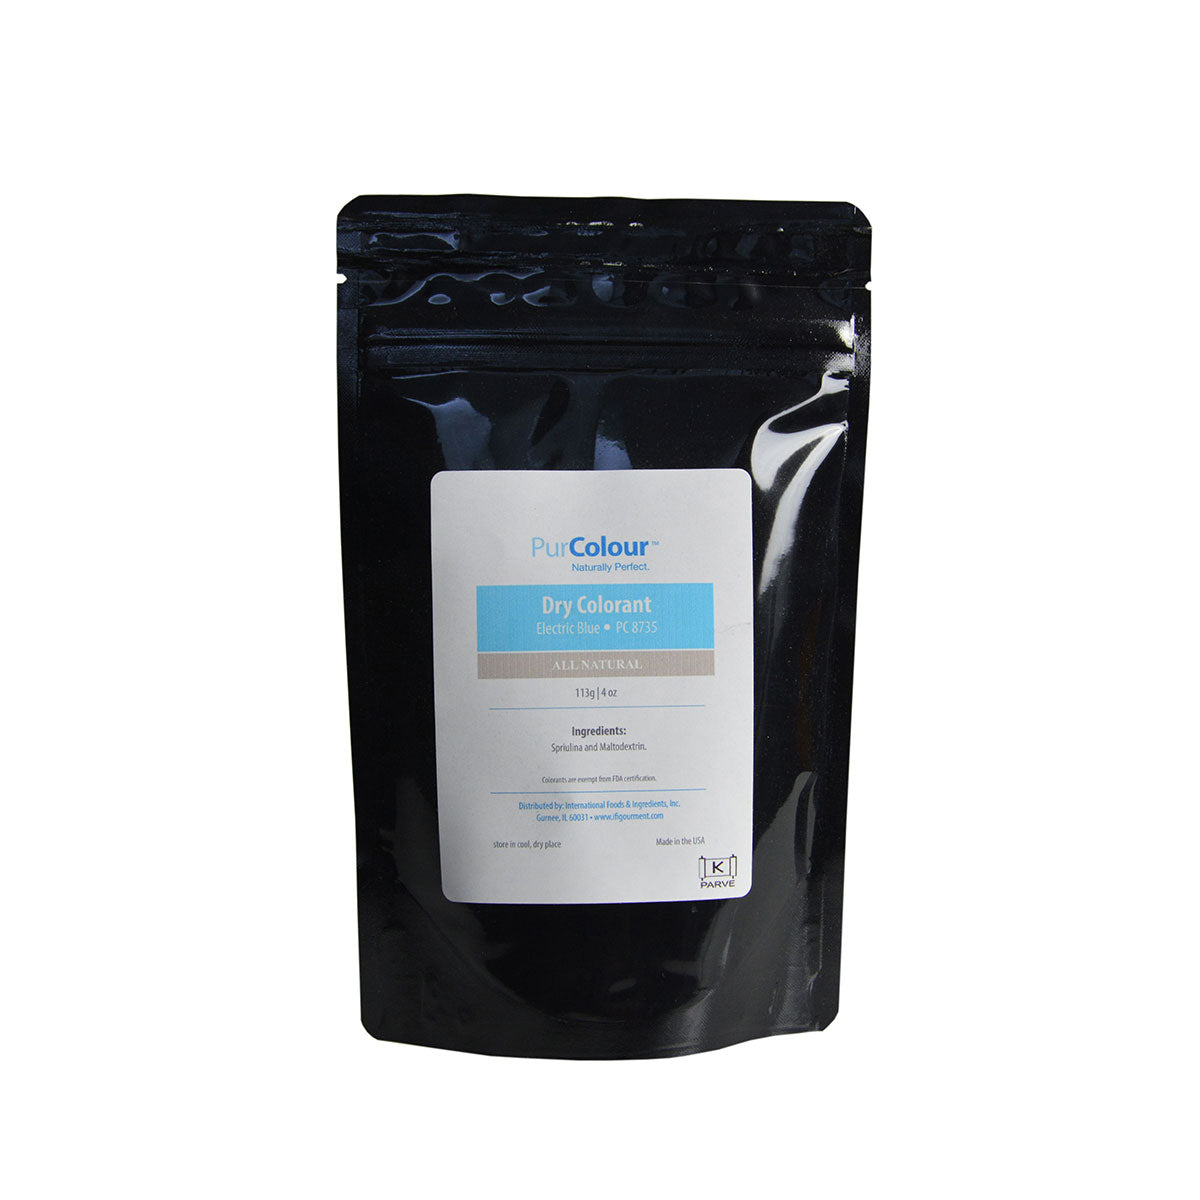 Dry colorant electric blue in bag packaging purcolour